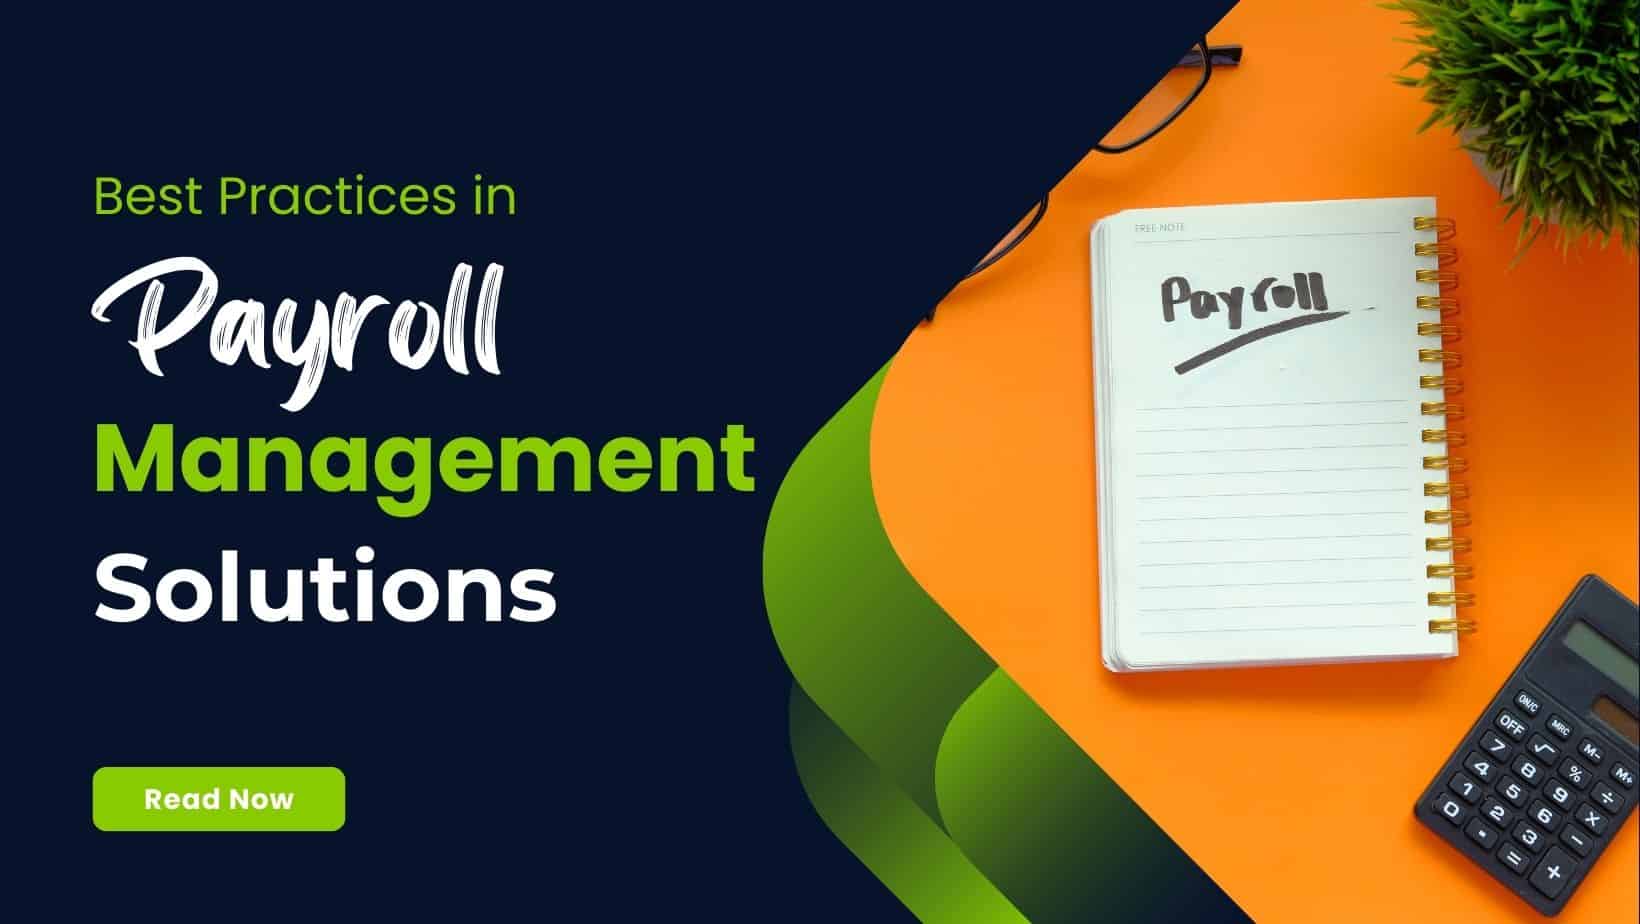 Best Practices in Payroll Management